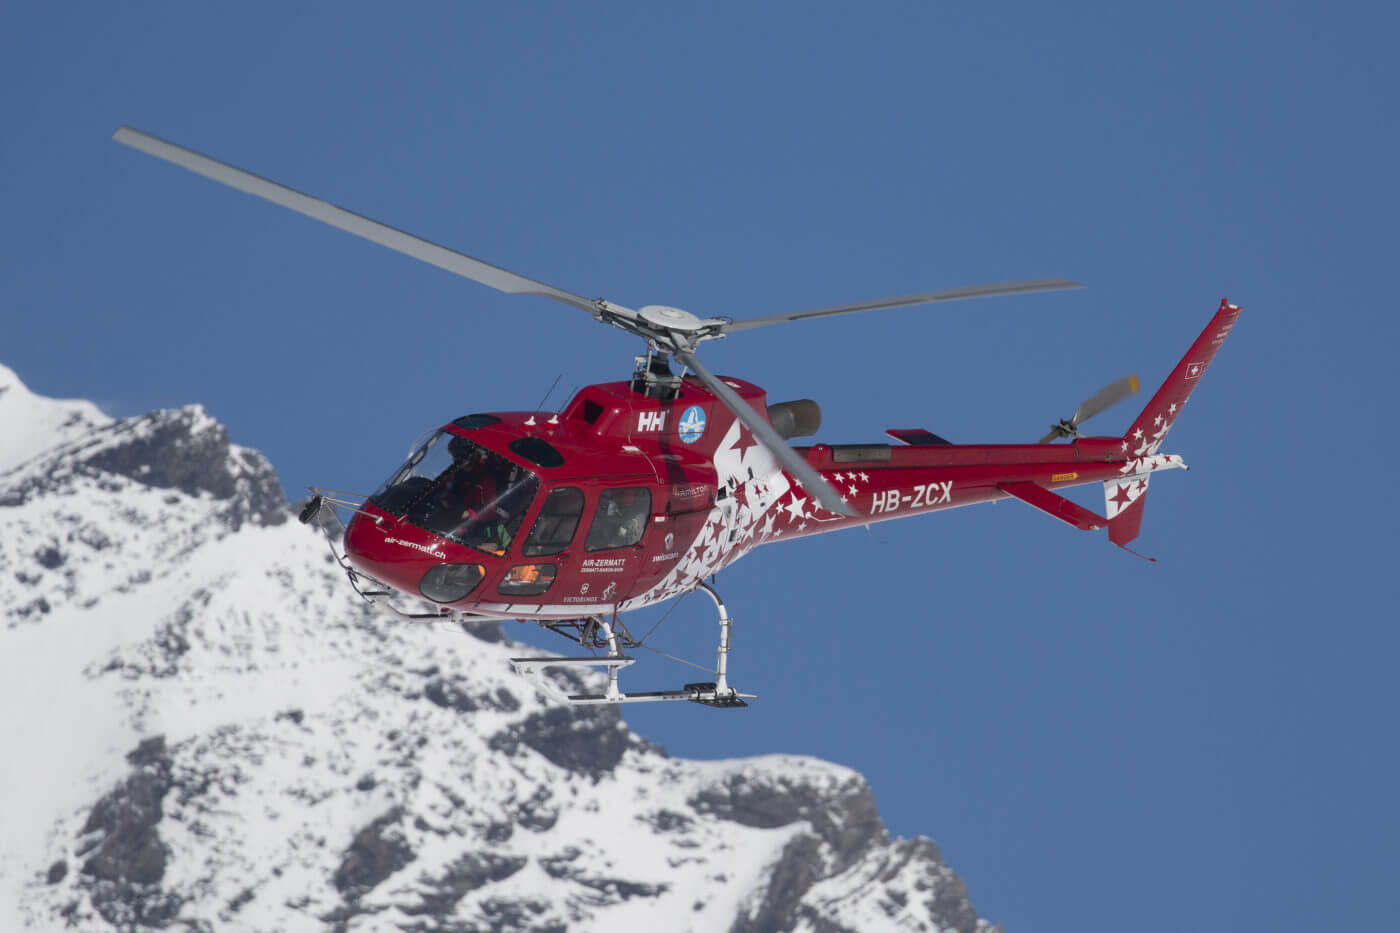 Air Zermatt and Air-Glaciers are to merge, with the combined company having a fleet of 25 aircraft. Remco de Wit Photo